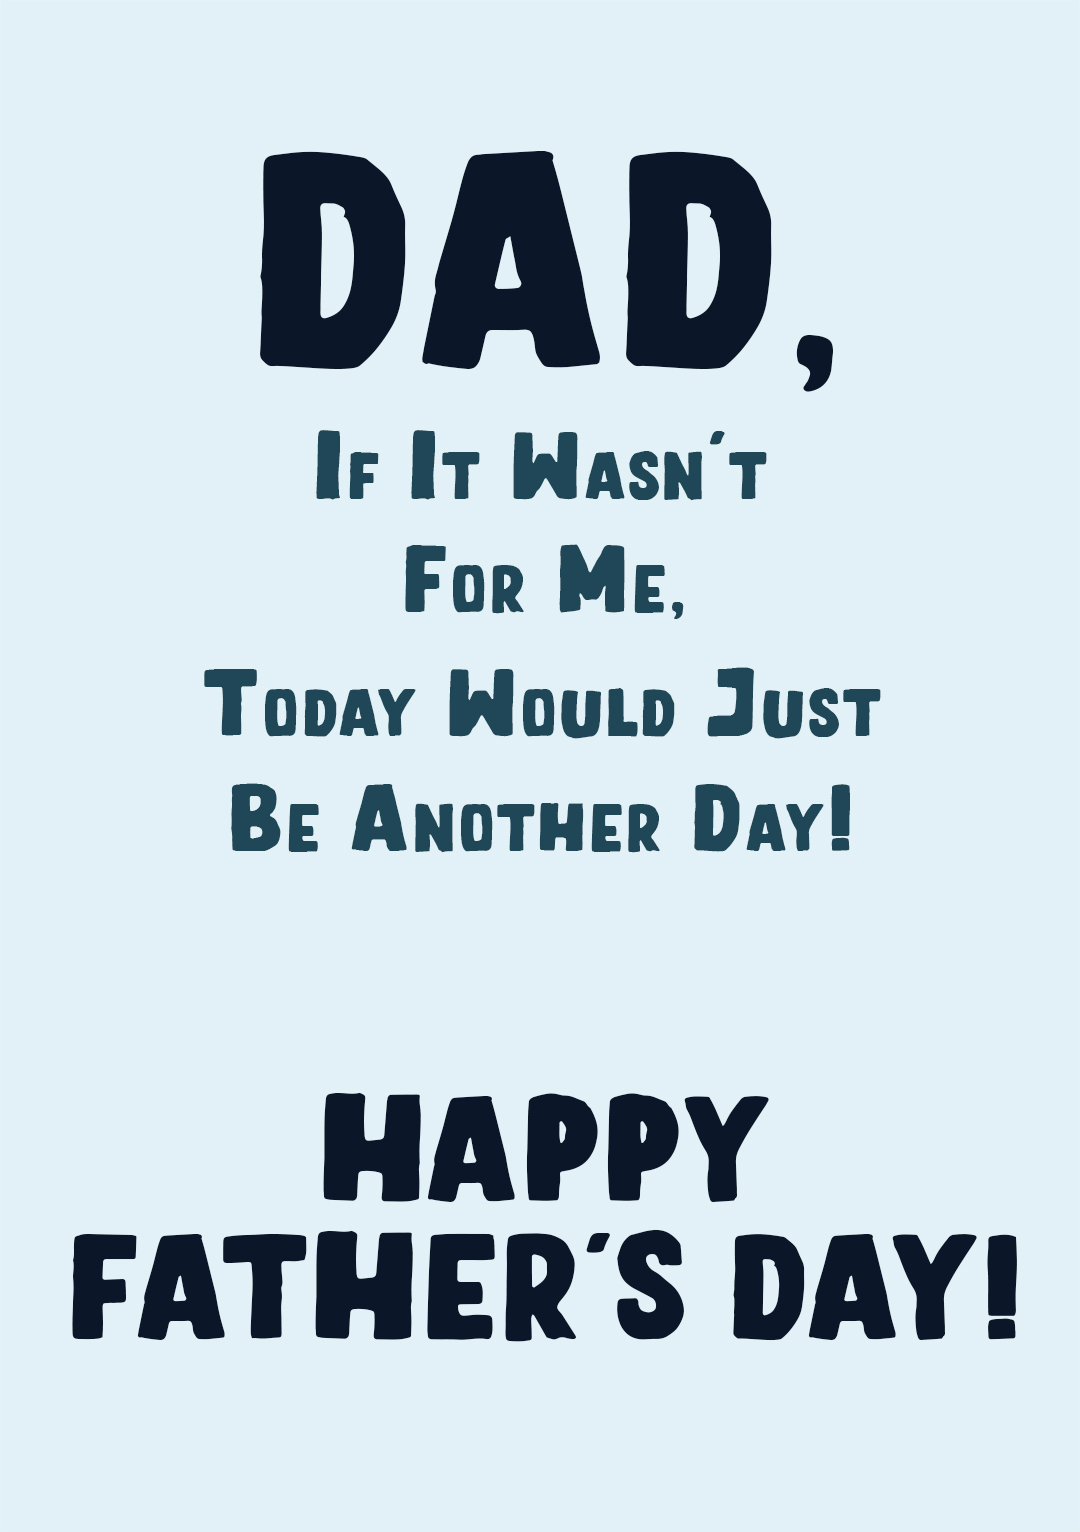 If It Wasn't For Me...Father's Day Card